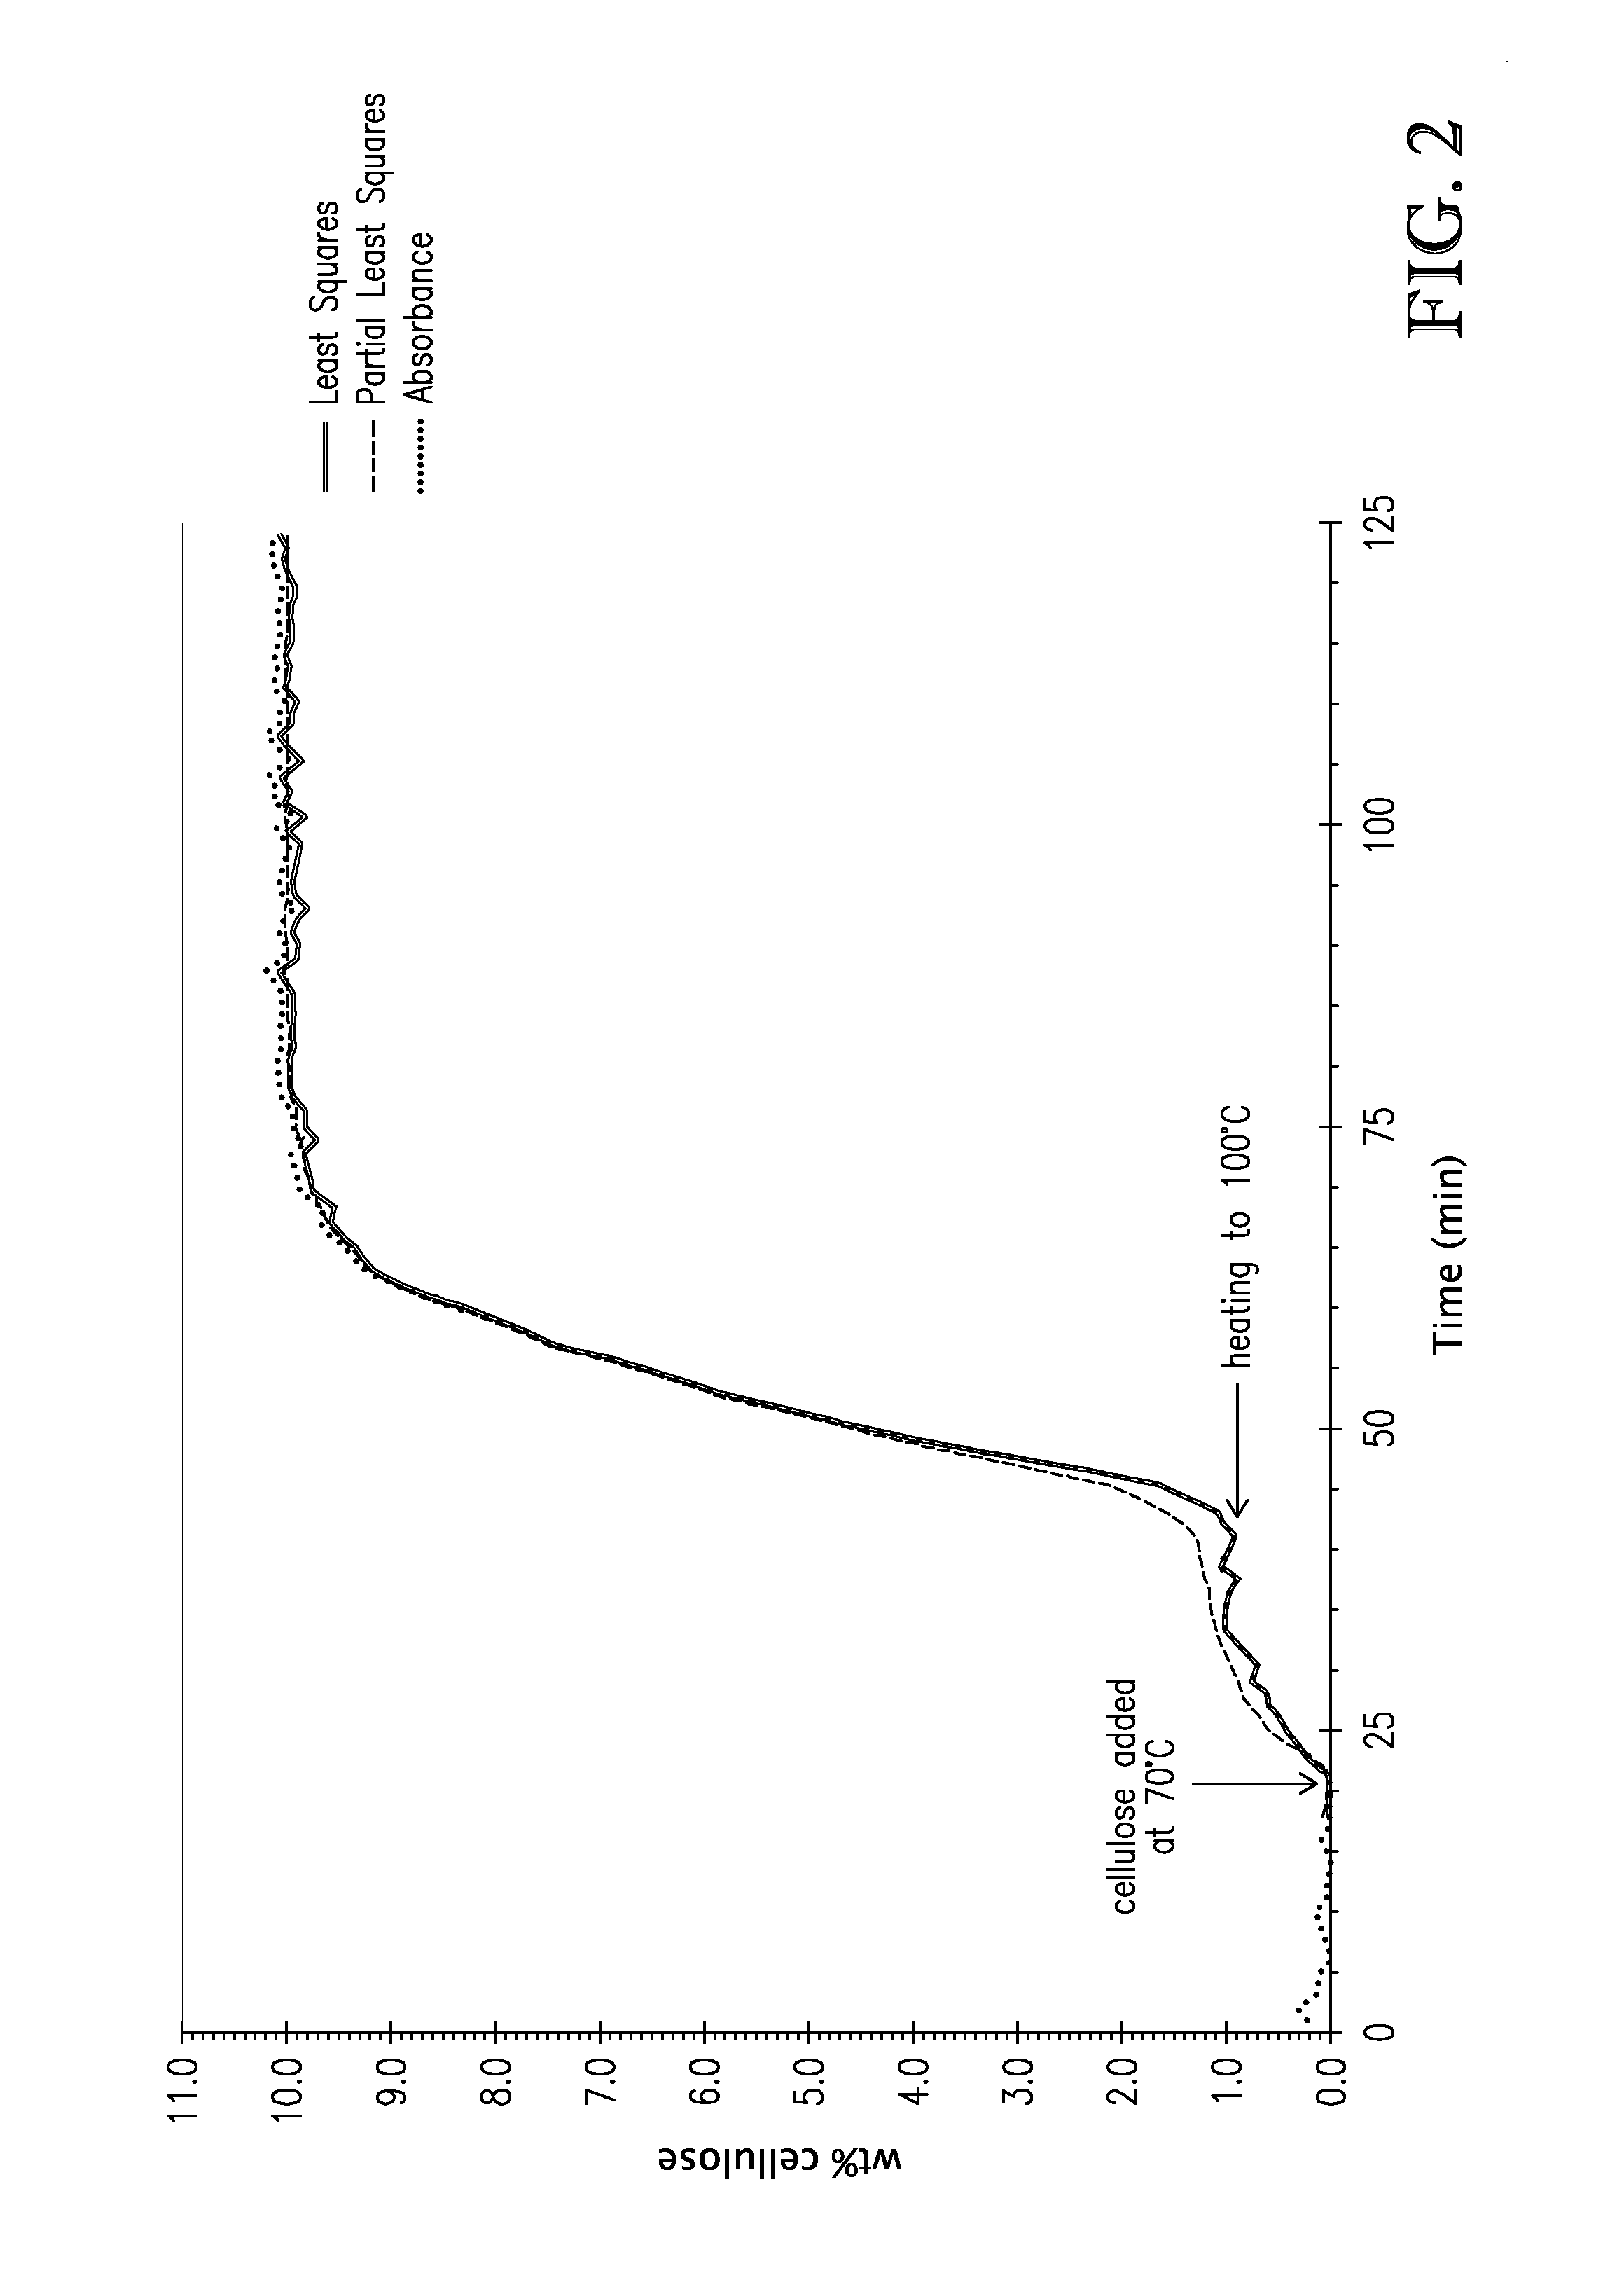 Regioselectively substituted cellulose esters produced in a tetraalkylammonium alkylphosphate ionic liquid process and products produced therefrom